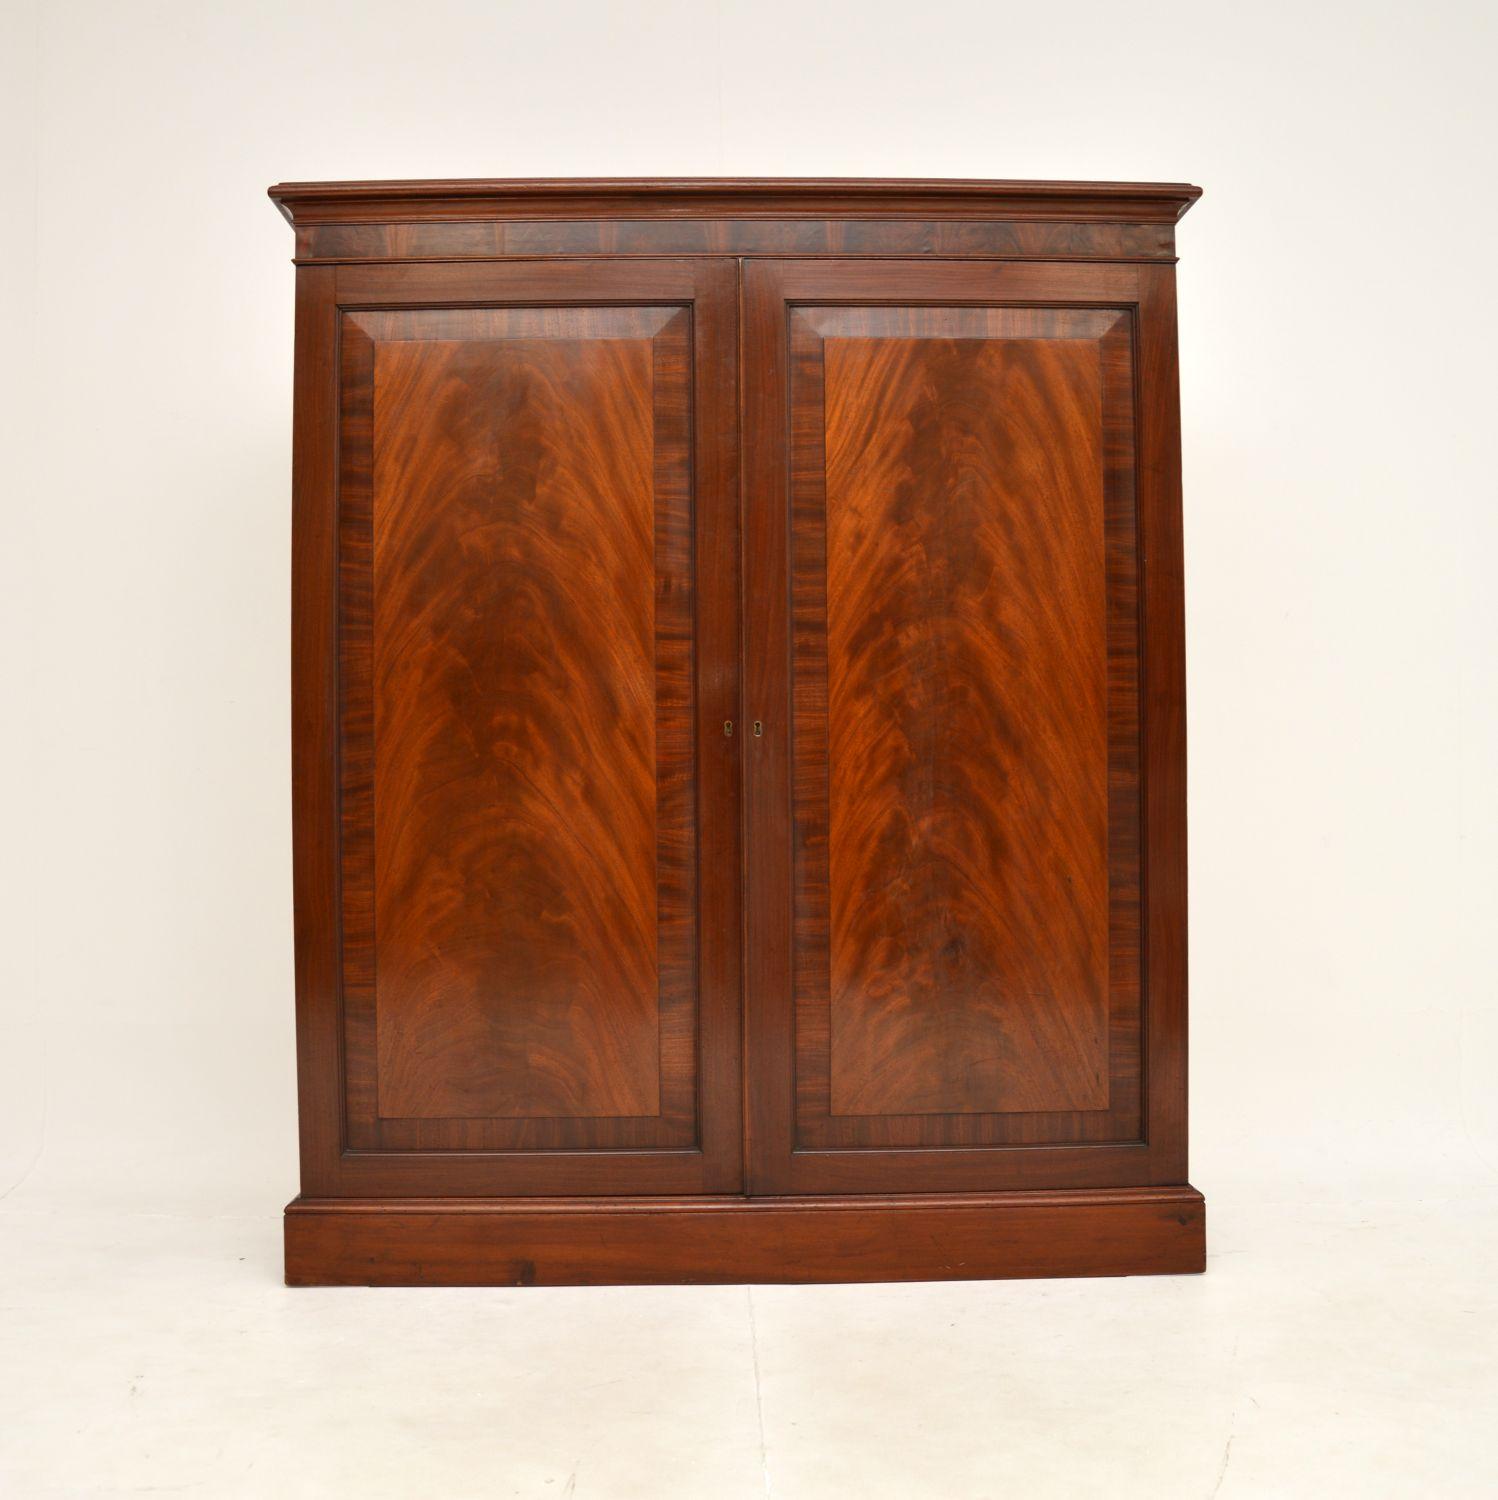 A smart and very well made antique Victorian cabinet. It’s really meant to be a bookcase with doors. This was made in England, it dates from around the 1840-1860 period.

The quality is fantastic, this is a useful size being quite large and